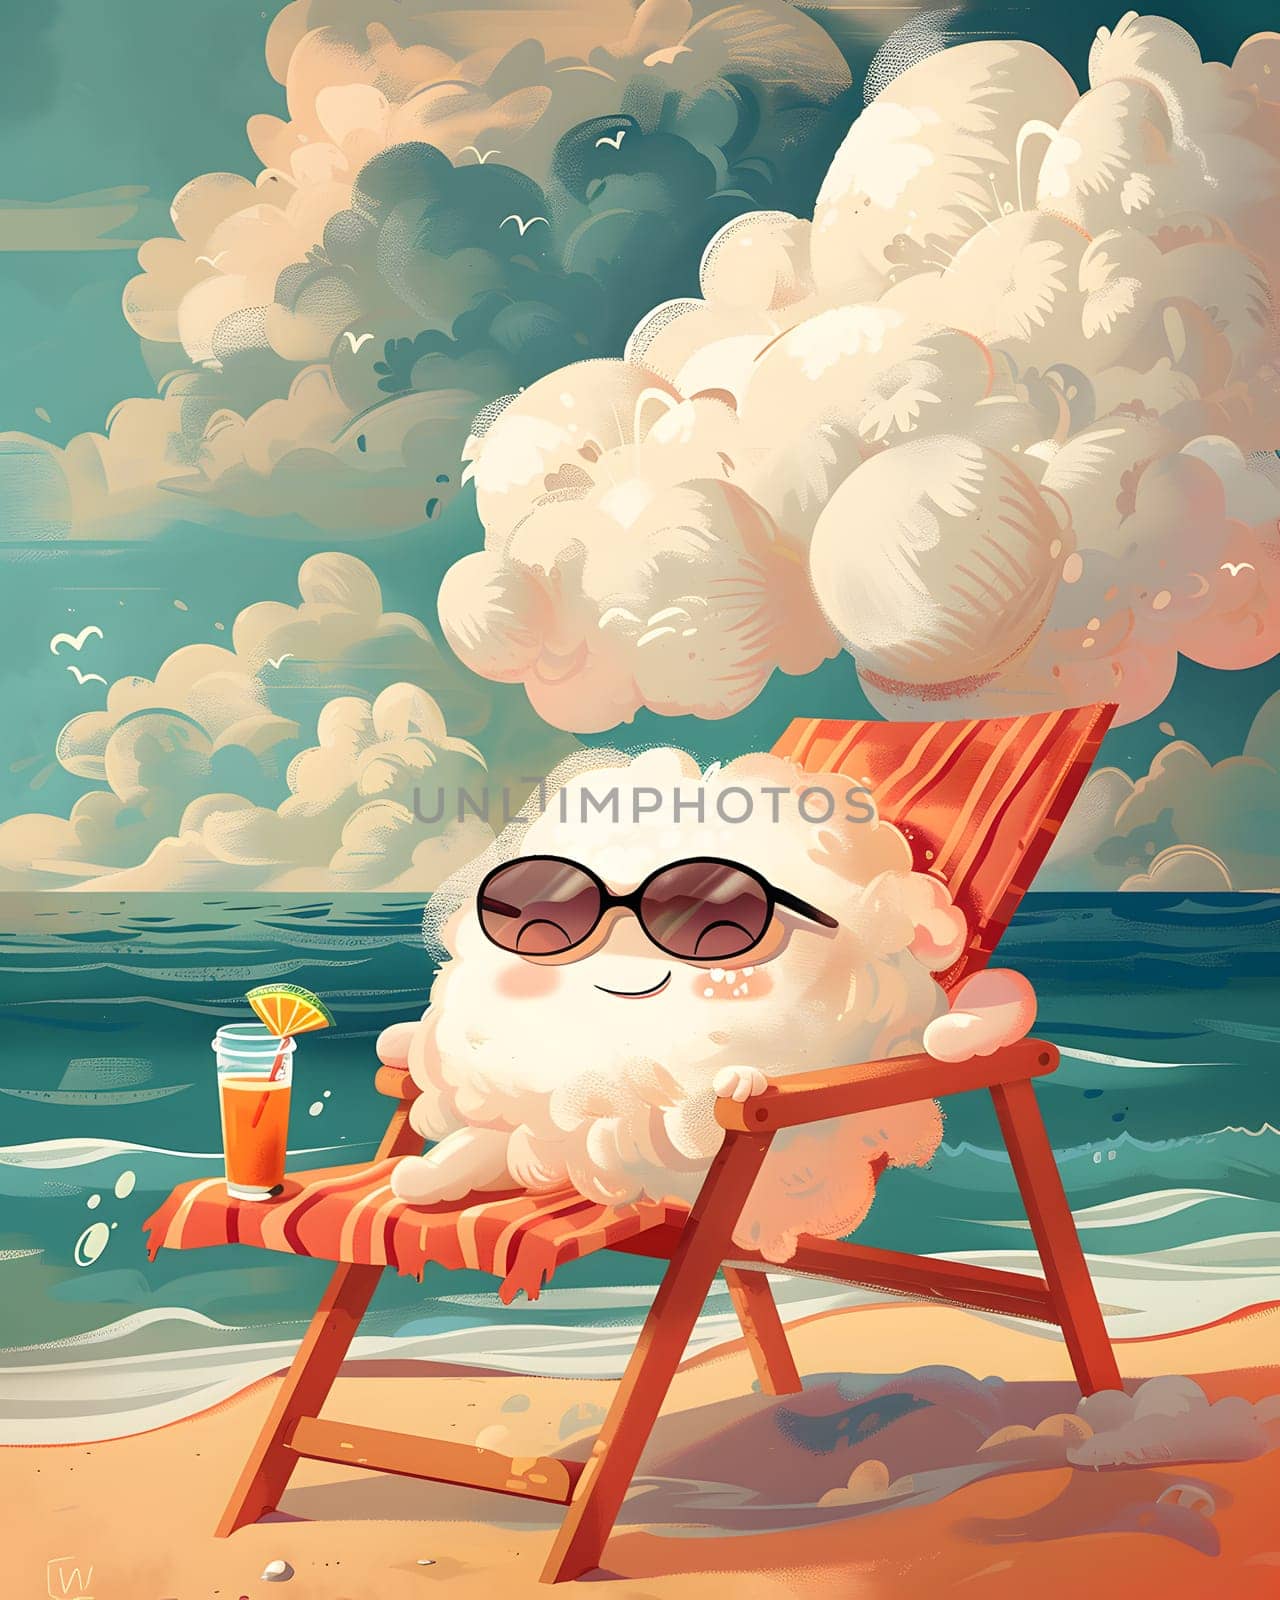 Cloud in sunglasses, painting a happy sky on a beach chair by Nadtochiy